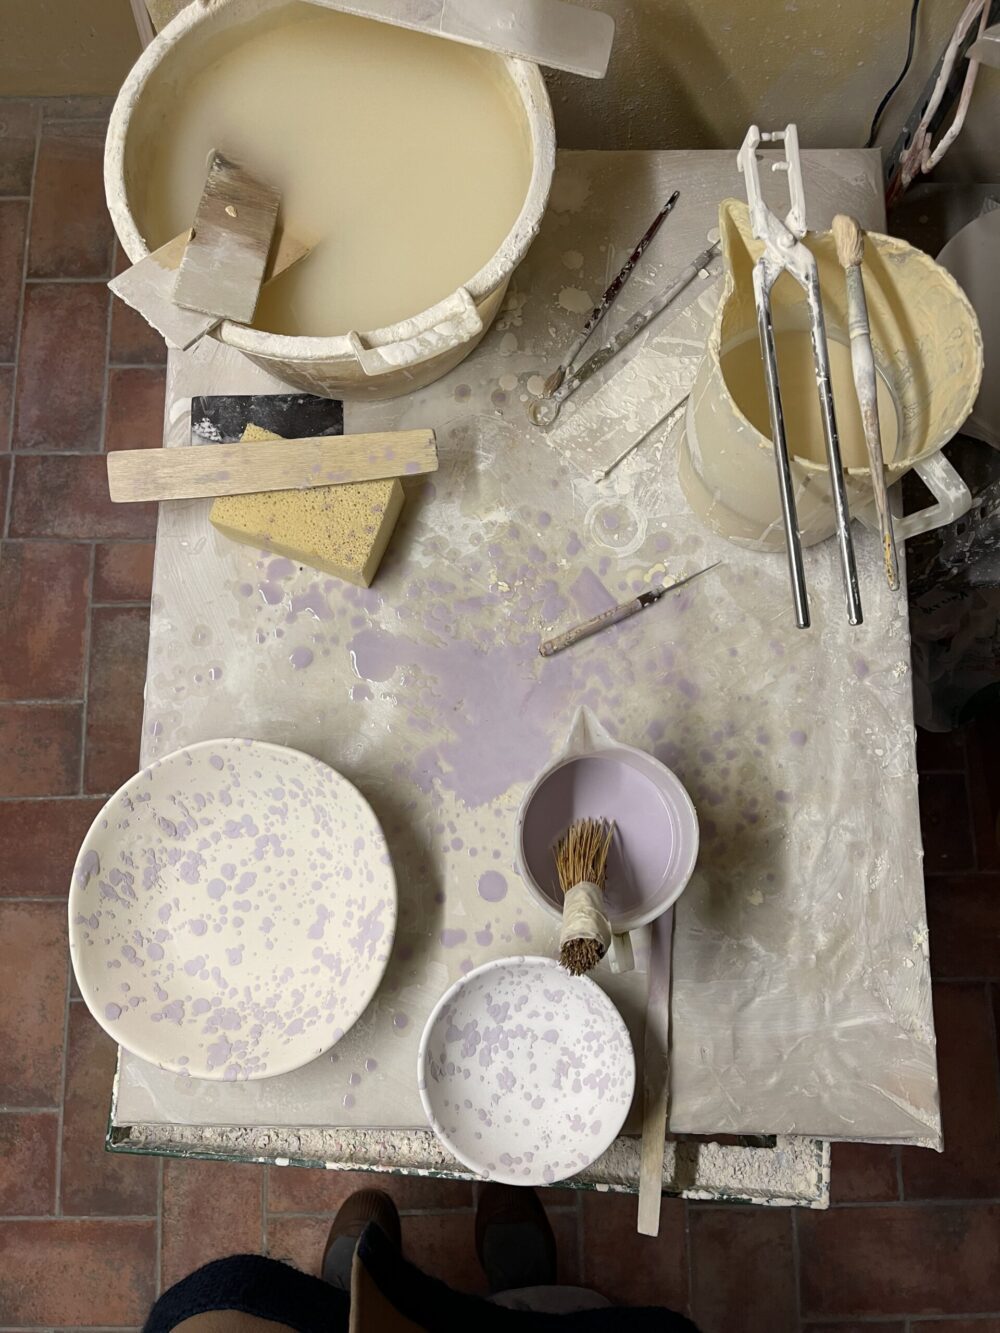 Splatterware in the making: there are two bowls painted with a light purple splatter. We see paint brushes and buckets full of paint.